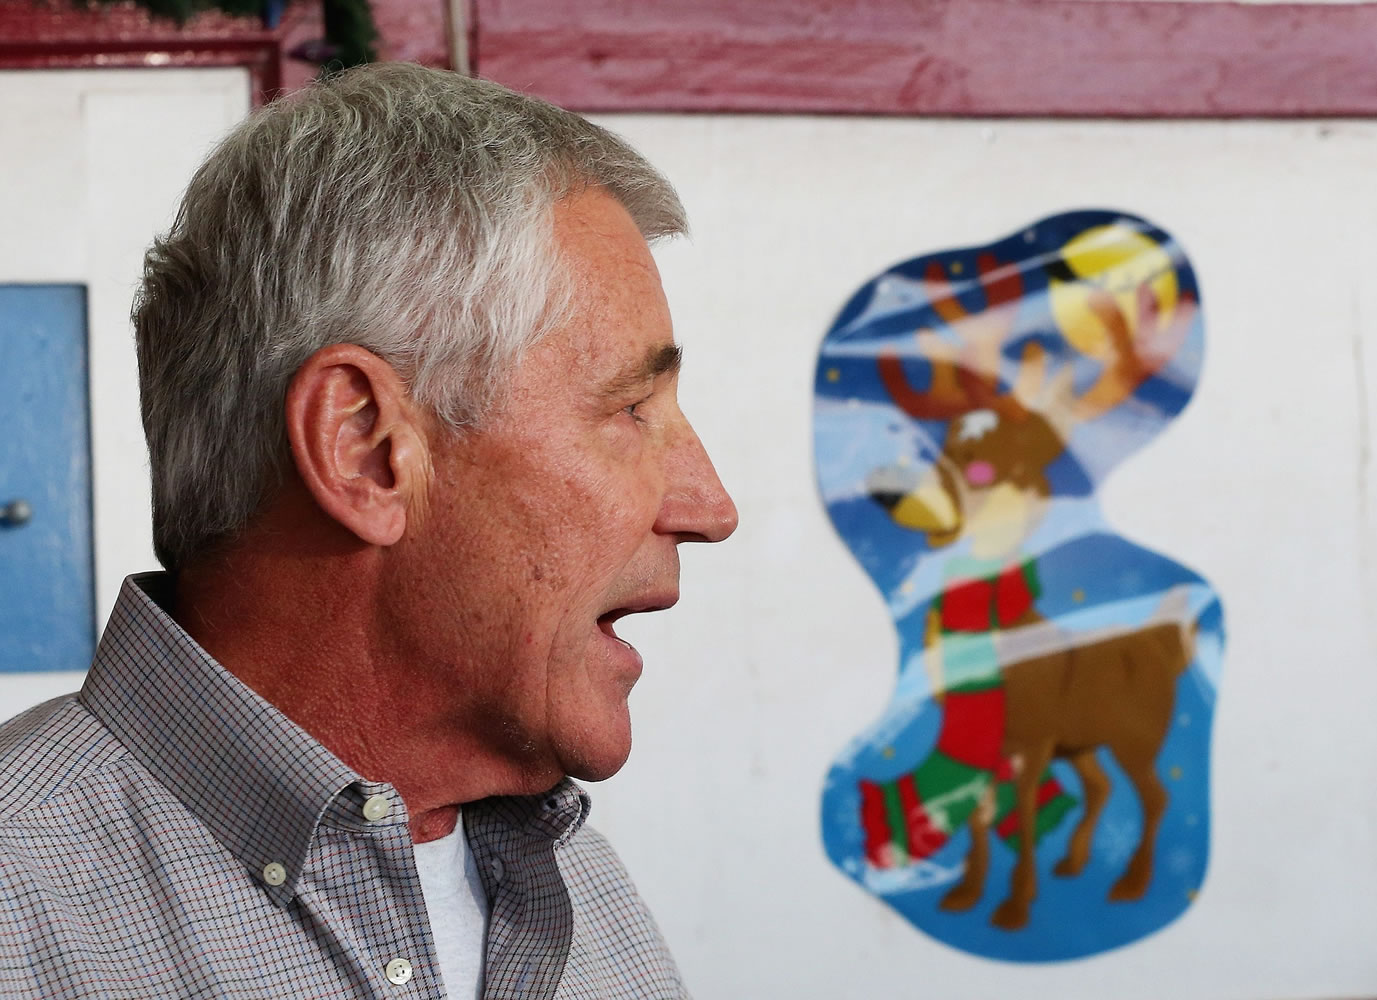 U.S. Secretary of Defense Chuck Hagel speaks during a press conference after visiting U.S. troops in Kuwait City, Monday, Dec. 8, 2014. Hagel visited the camp which once was a staging post for troops headed to Iraq.